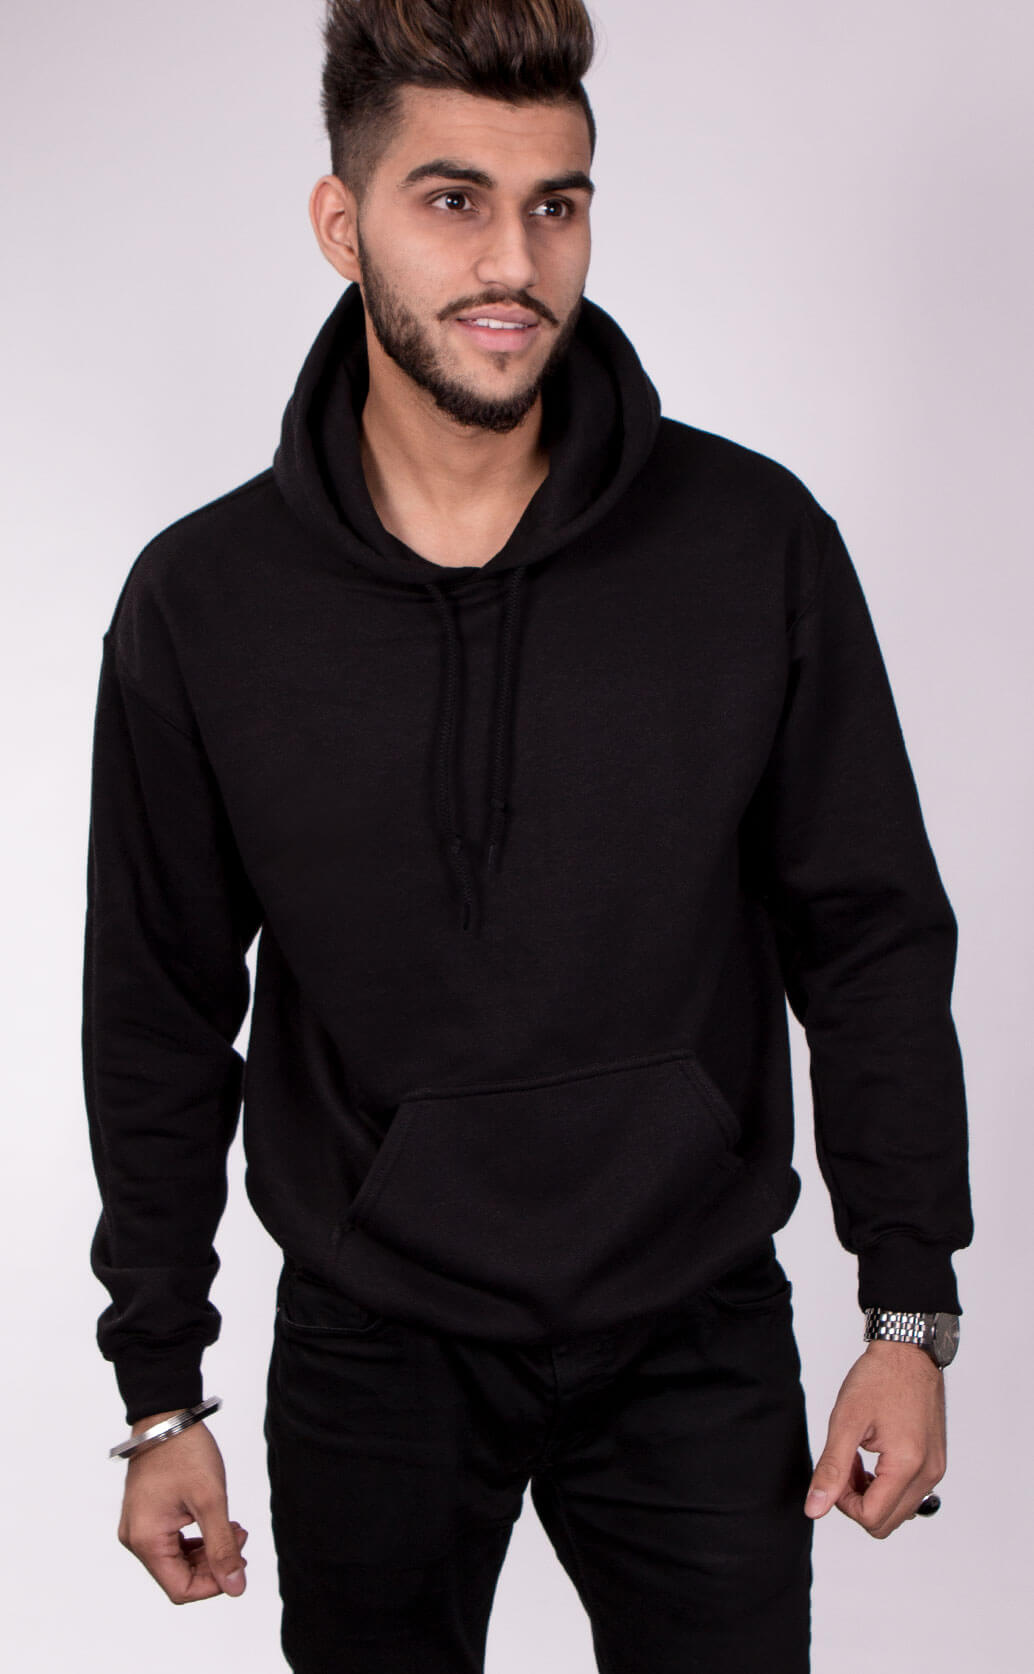 Size guide image for Unisex Hoodie mens shirt type. Model is male and dressed in black